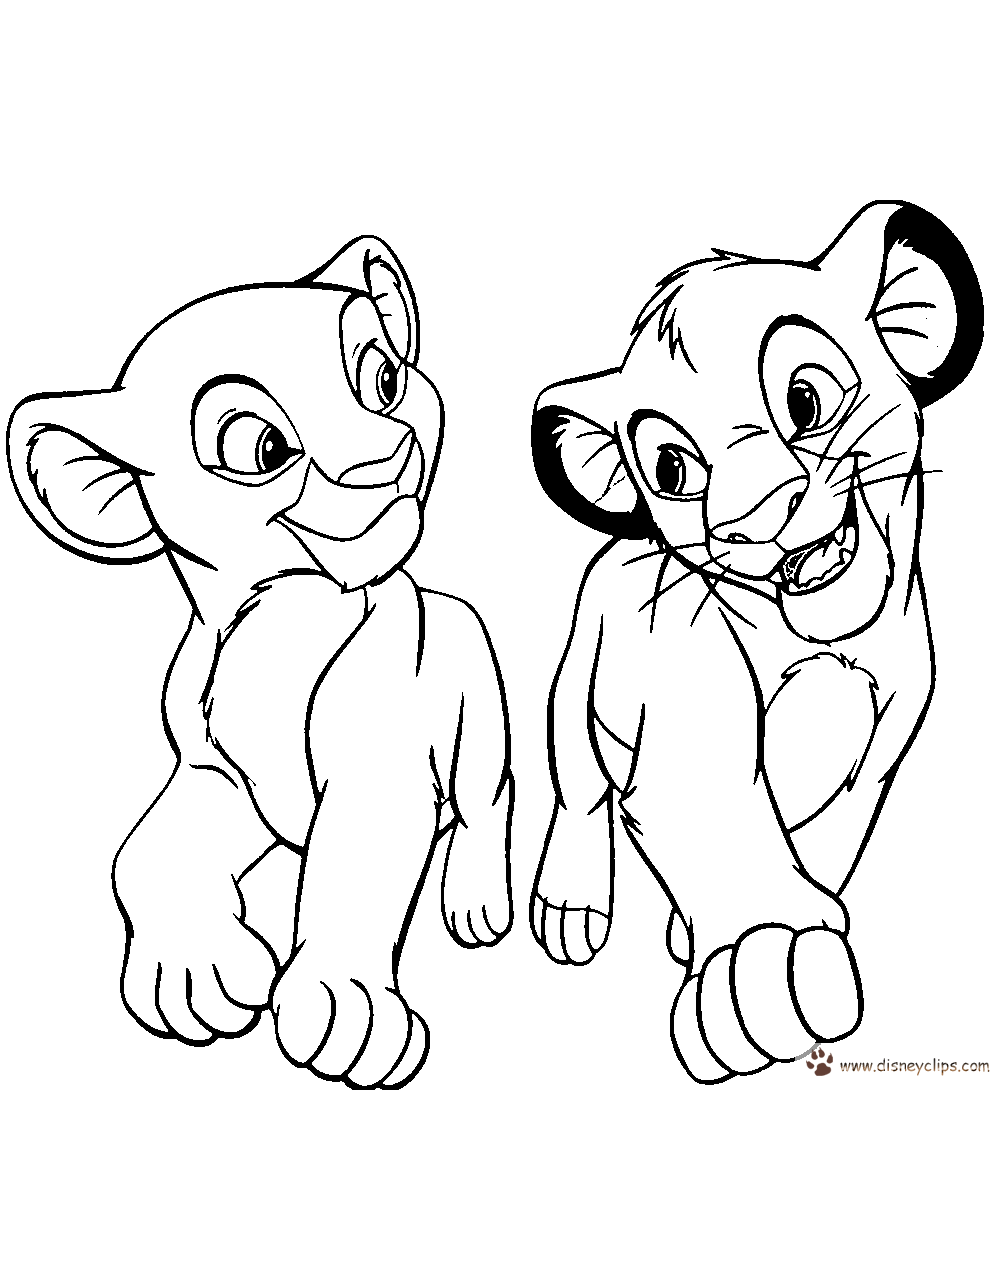 simba coloring page simba coloring pages to download and print for free simba coloring page 